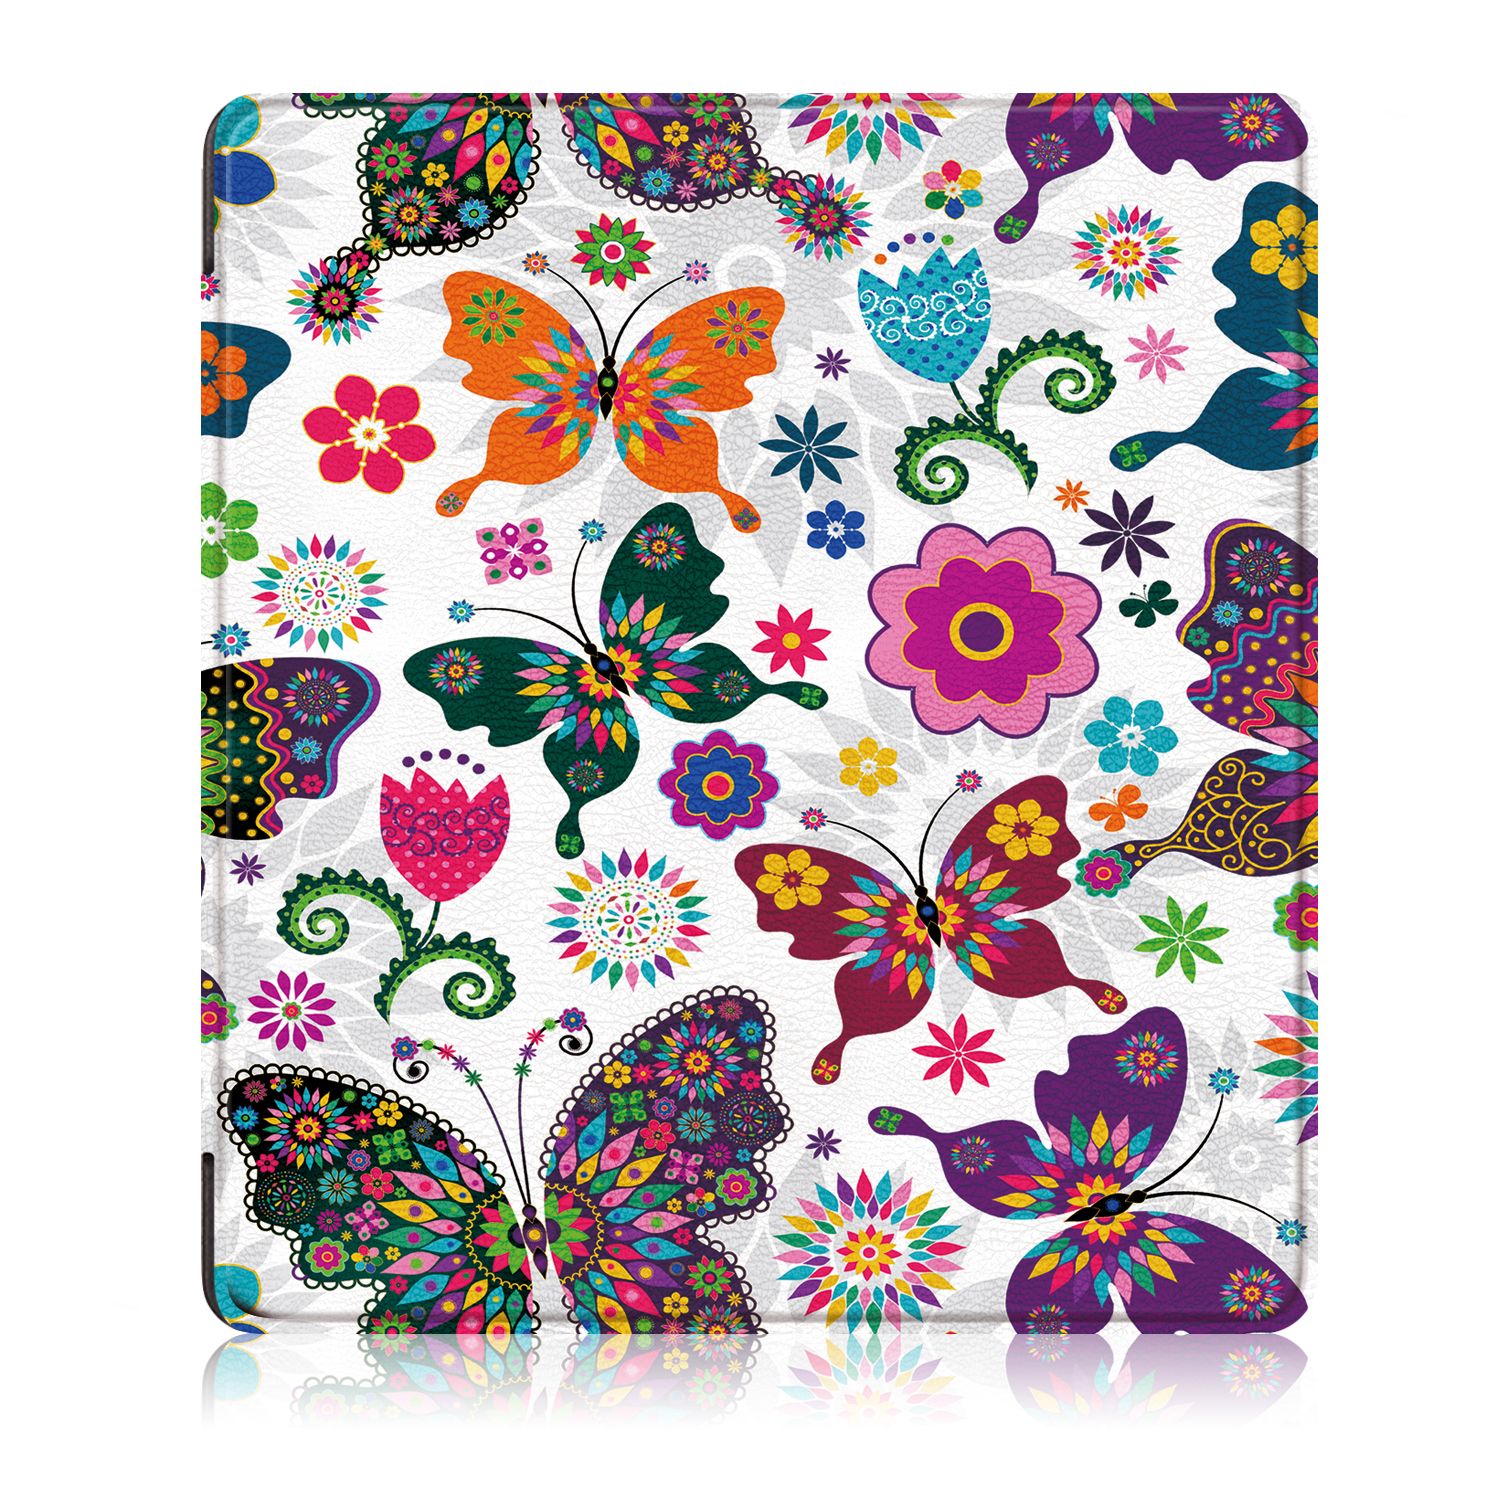 Printing-Tablet-Case-Cover-for-Kindle-oasis-2019---Butterfly-1539520